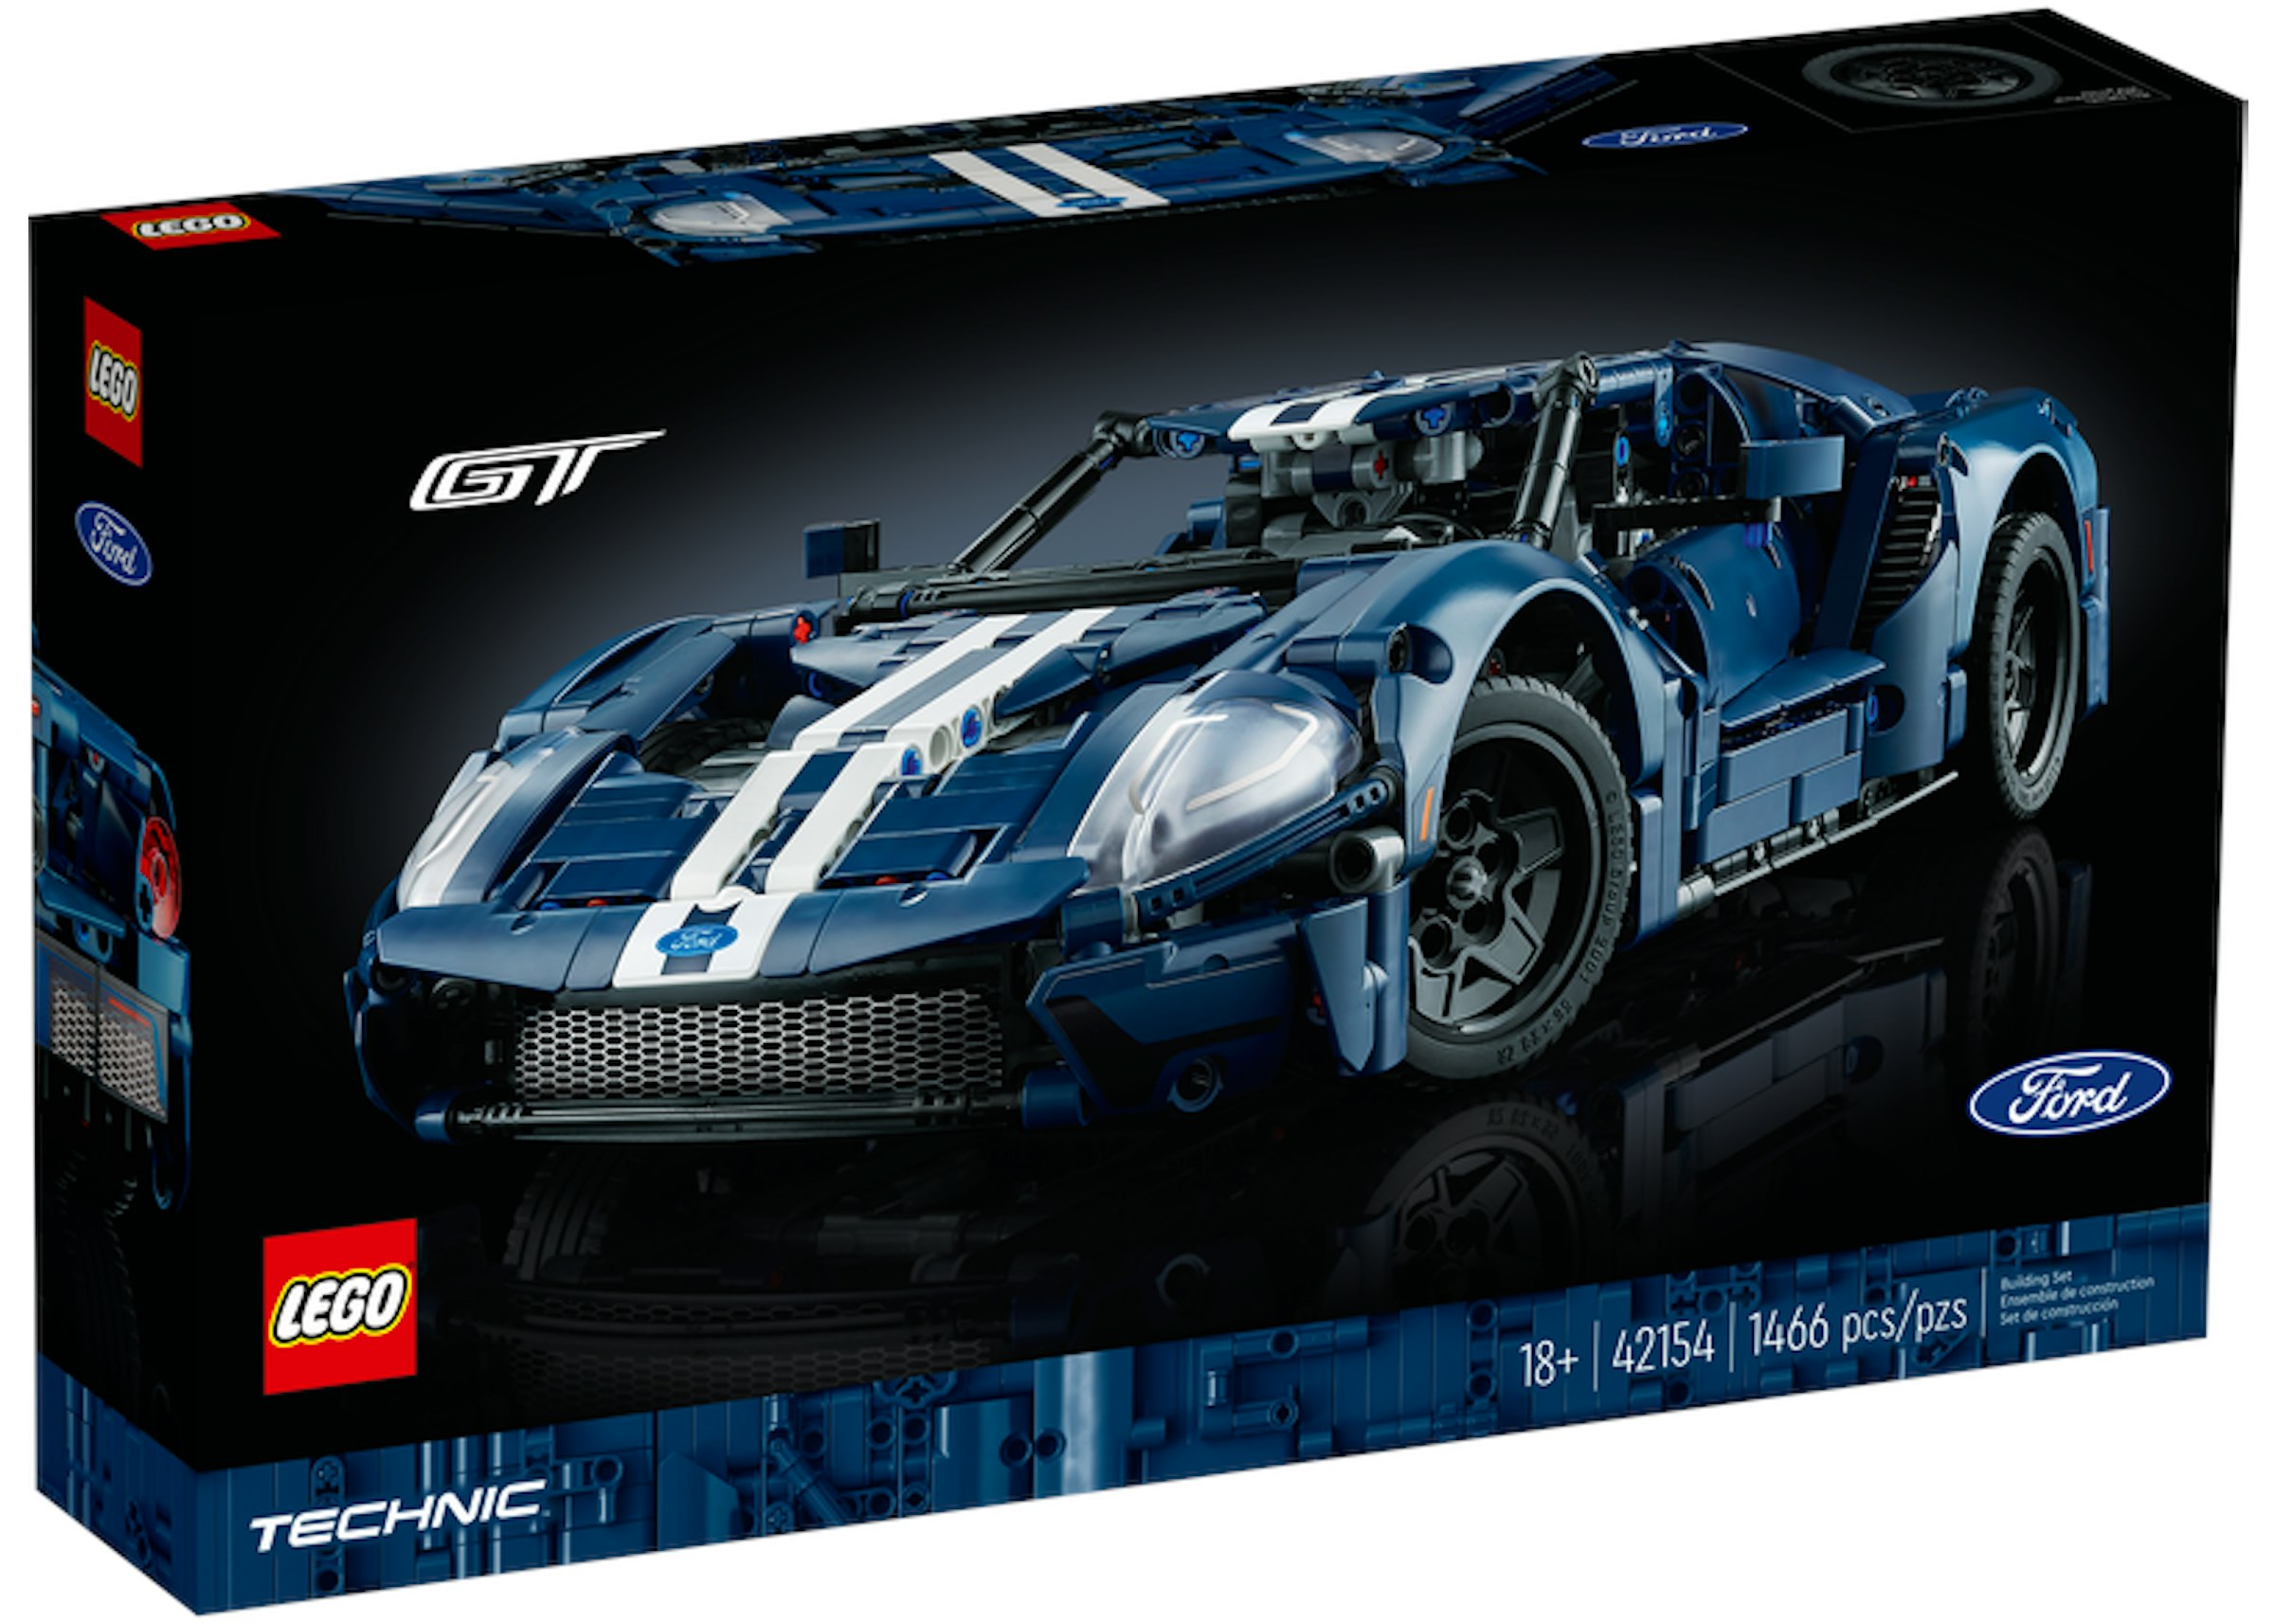 LEGO Technic 2022 Ford GT Set 42154 - US